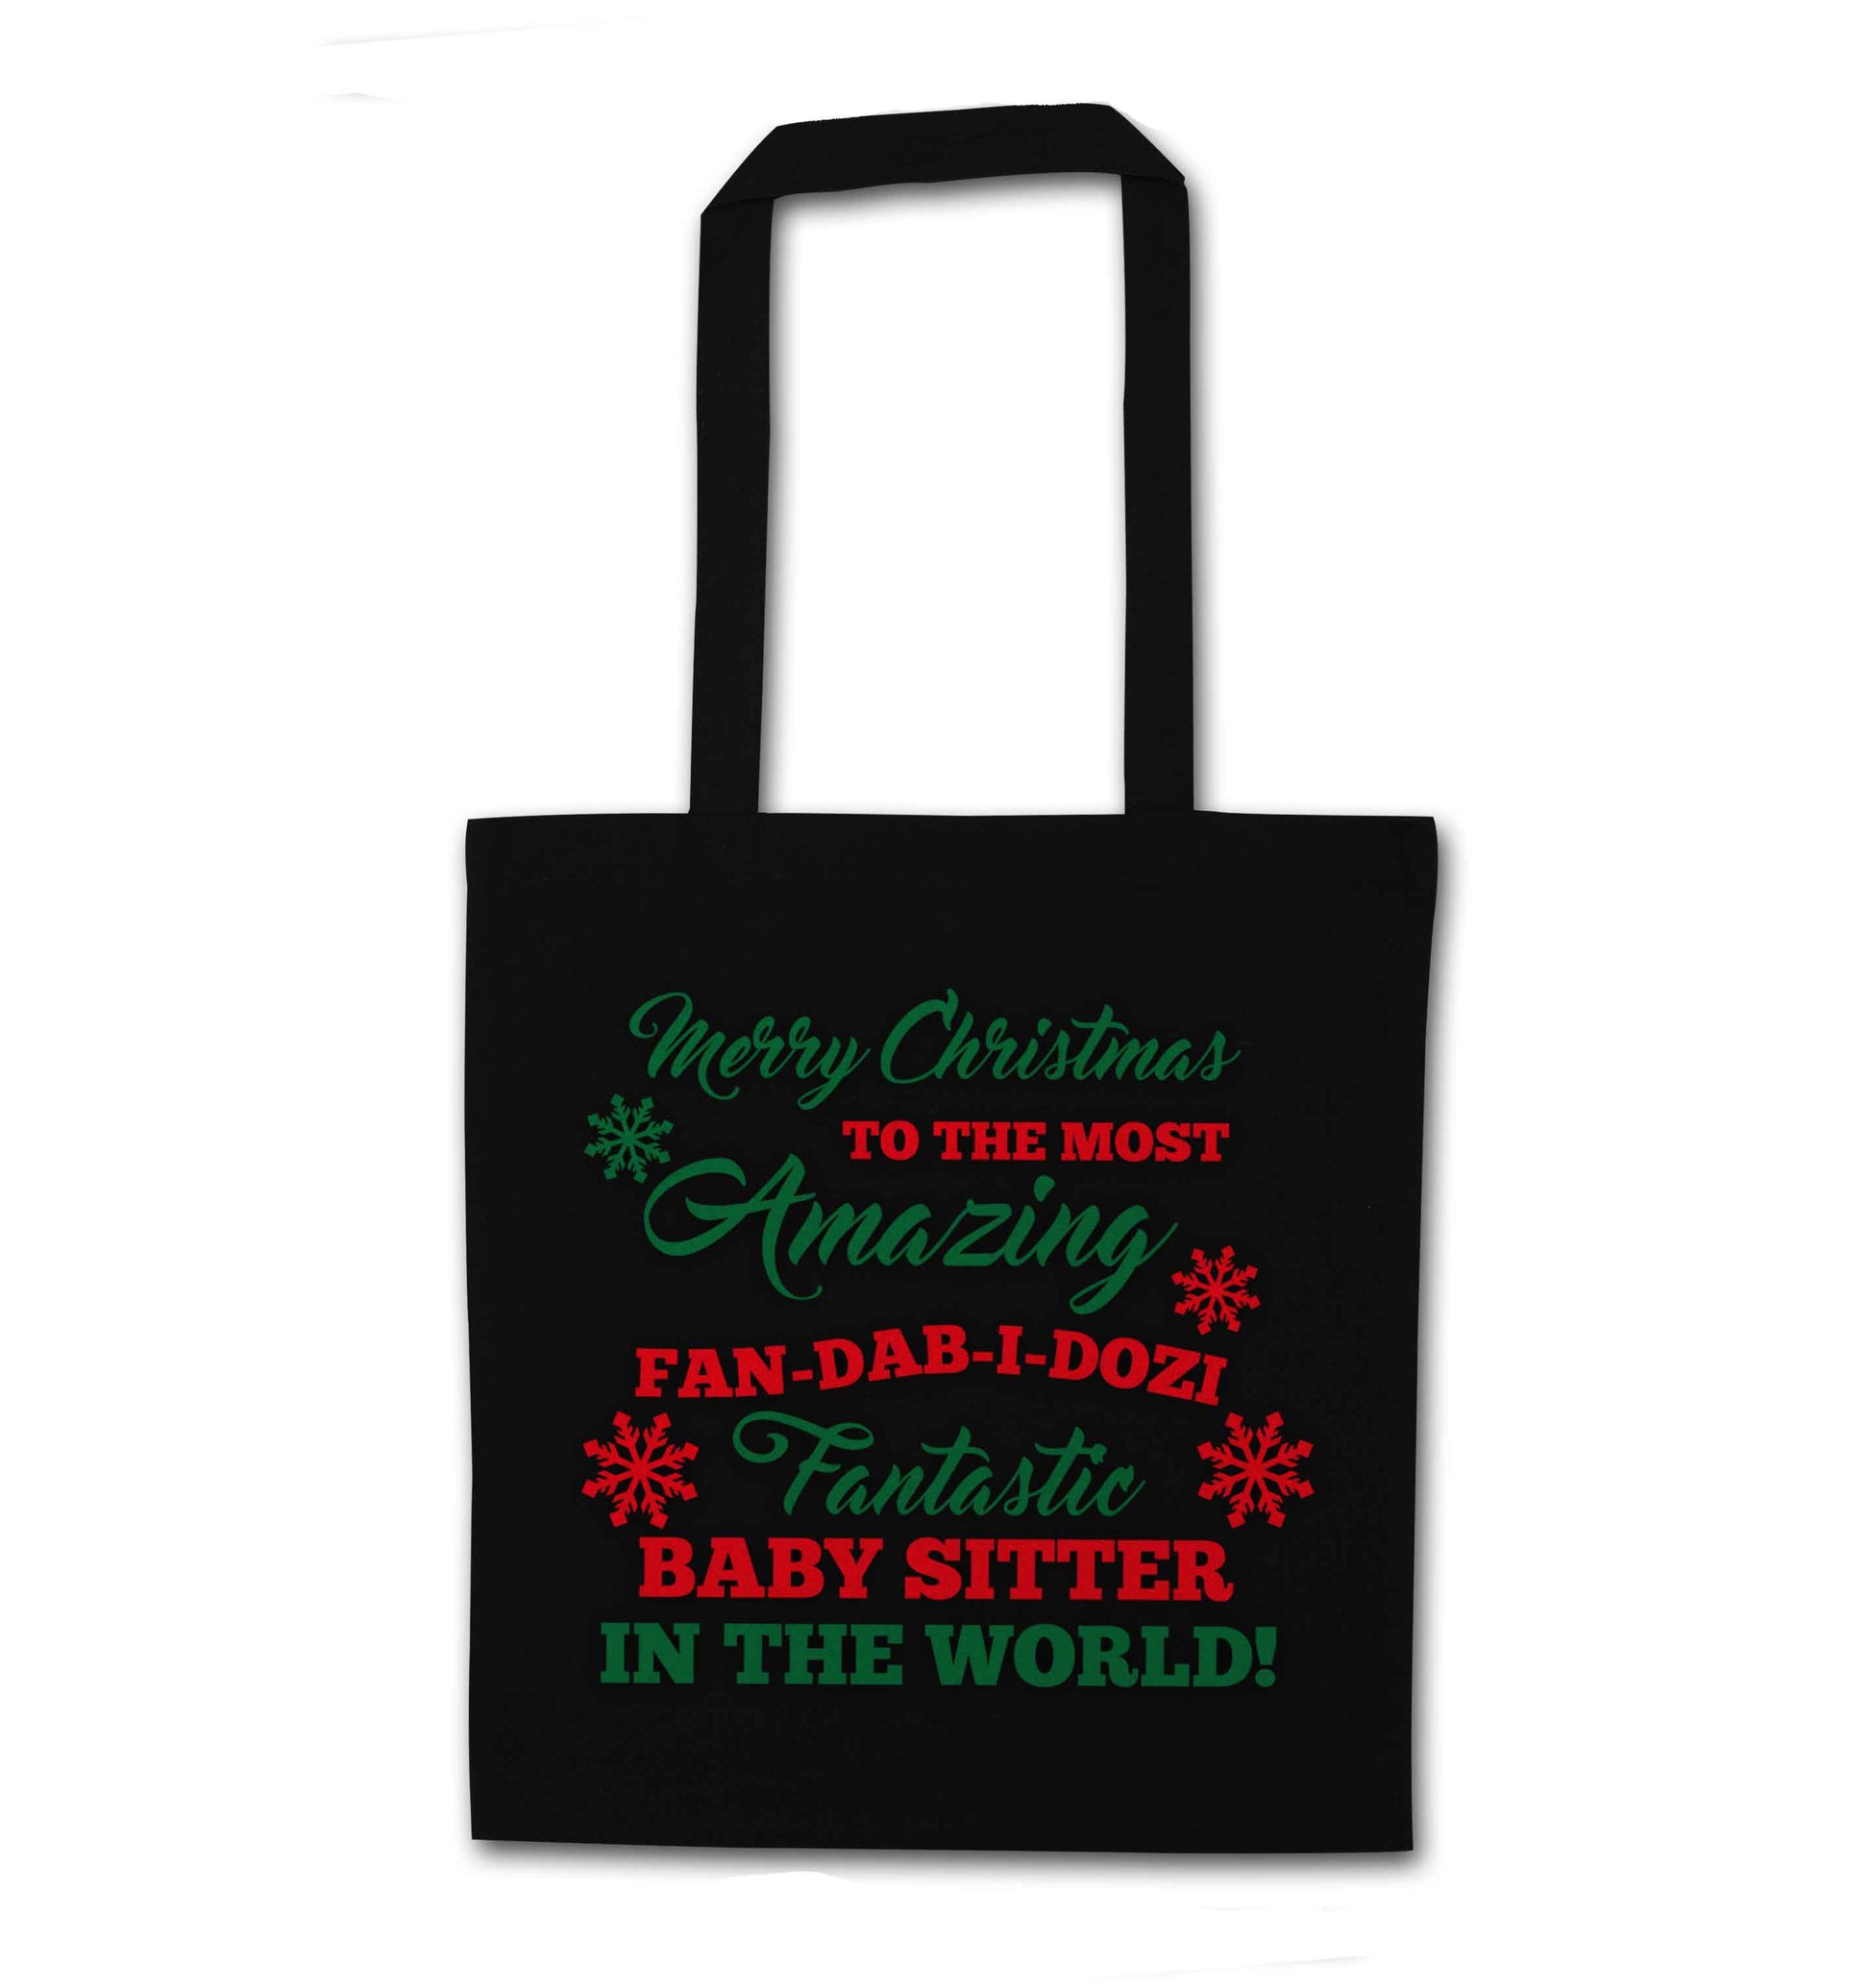 Merry Christmas to the most amazing fan-dab-i-dozi fantasic baby sitter in the world black tote bag